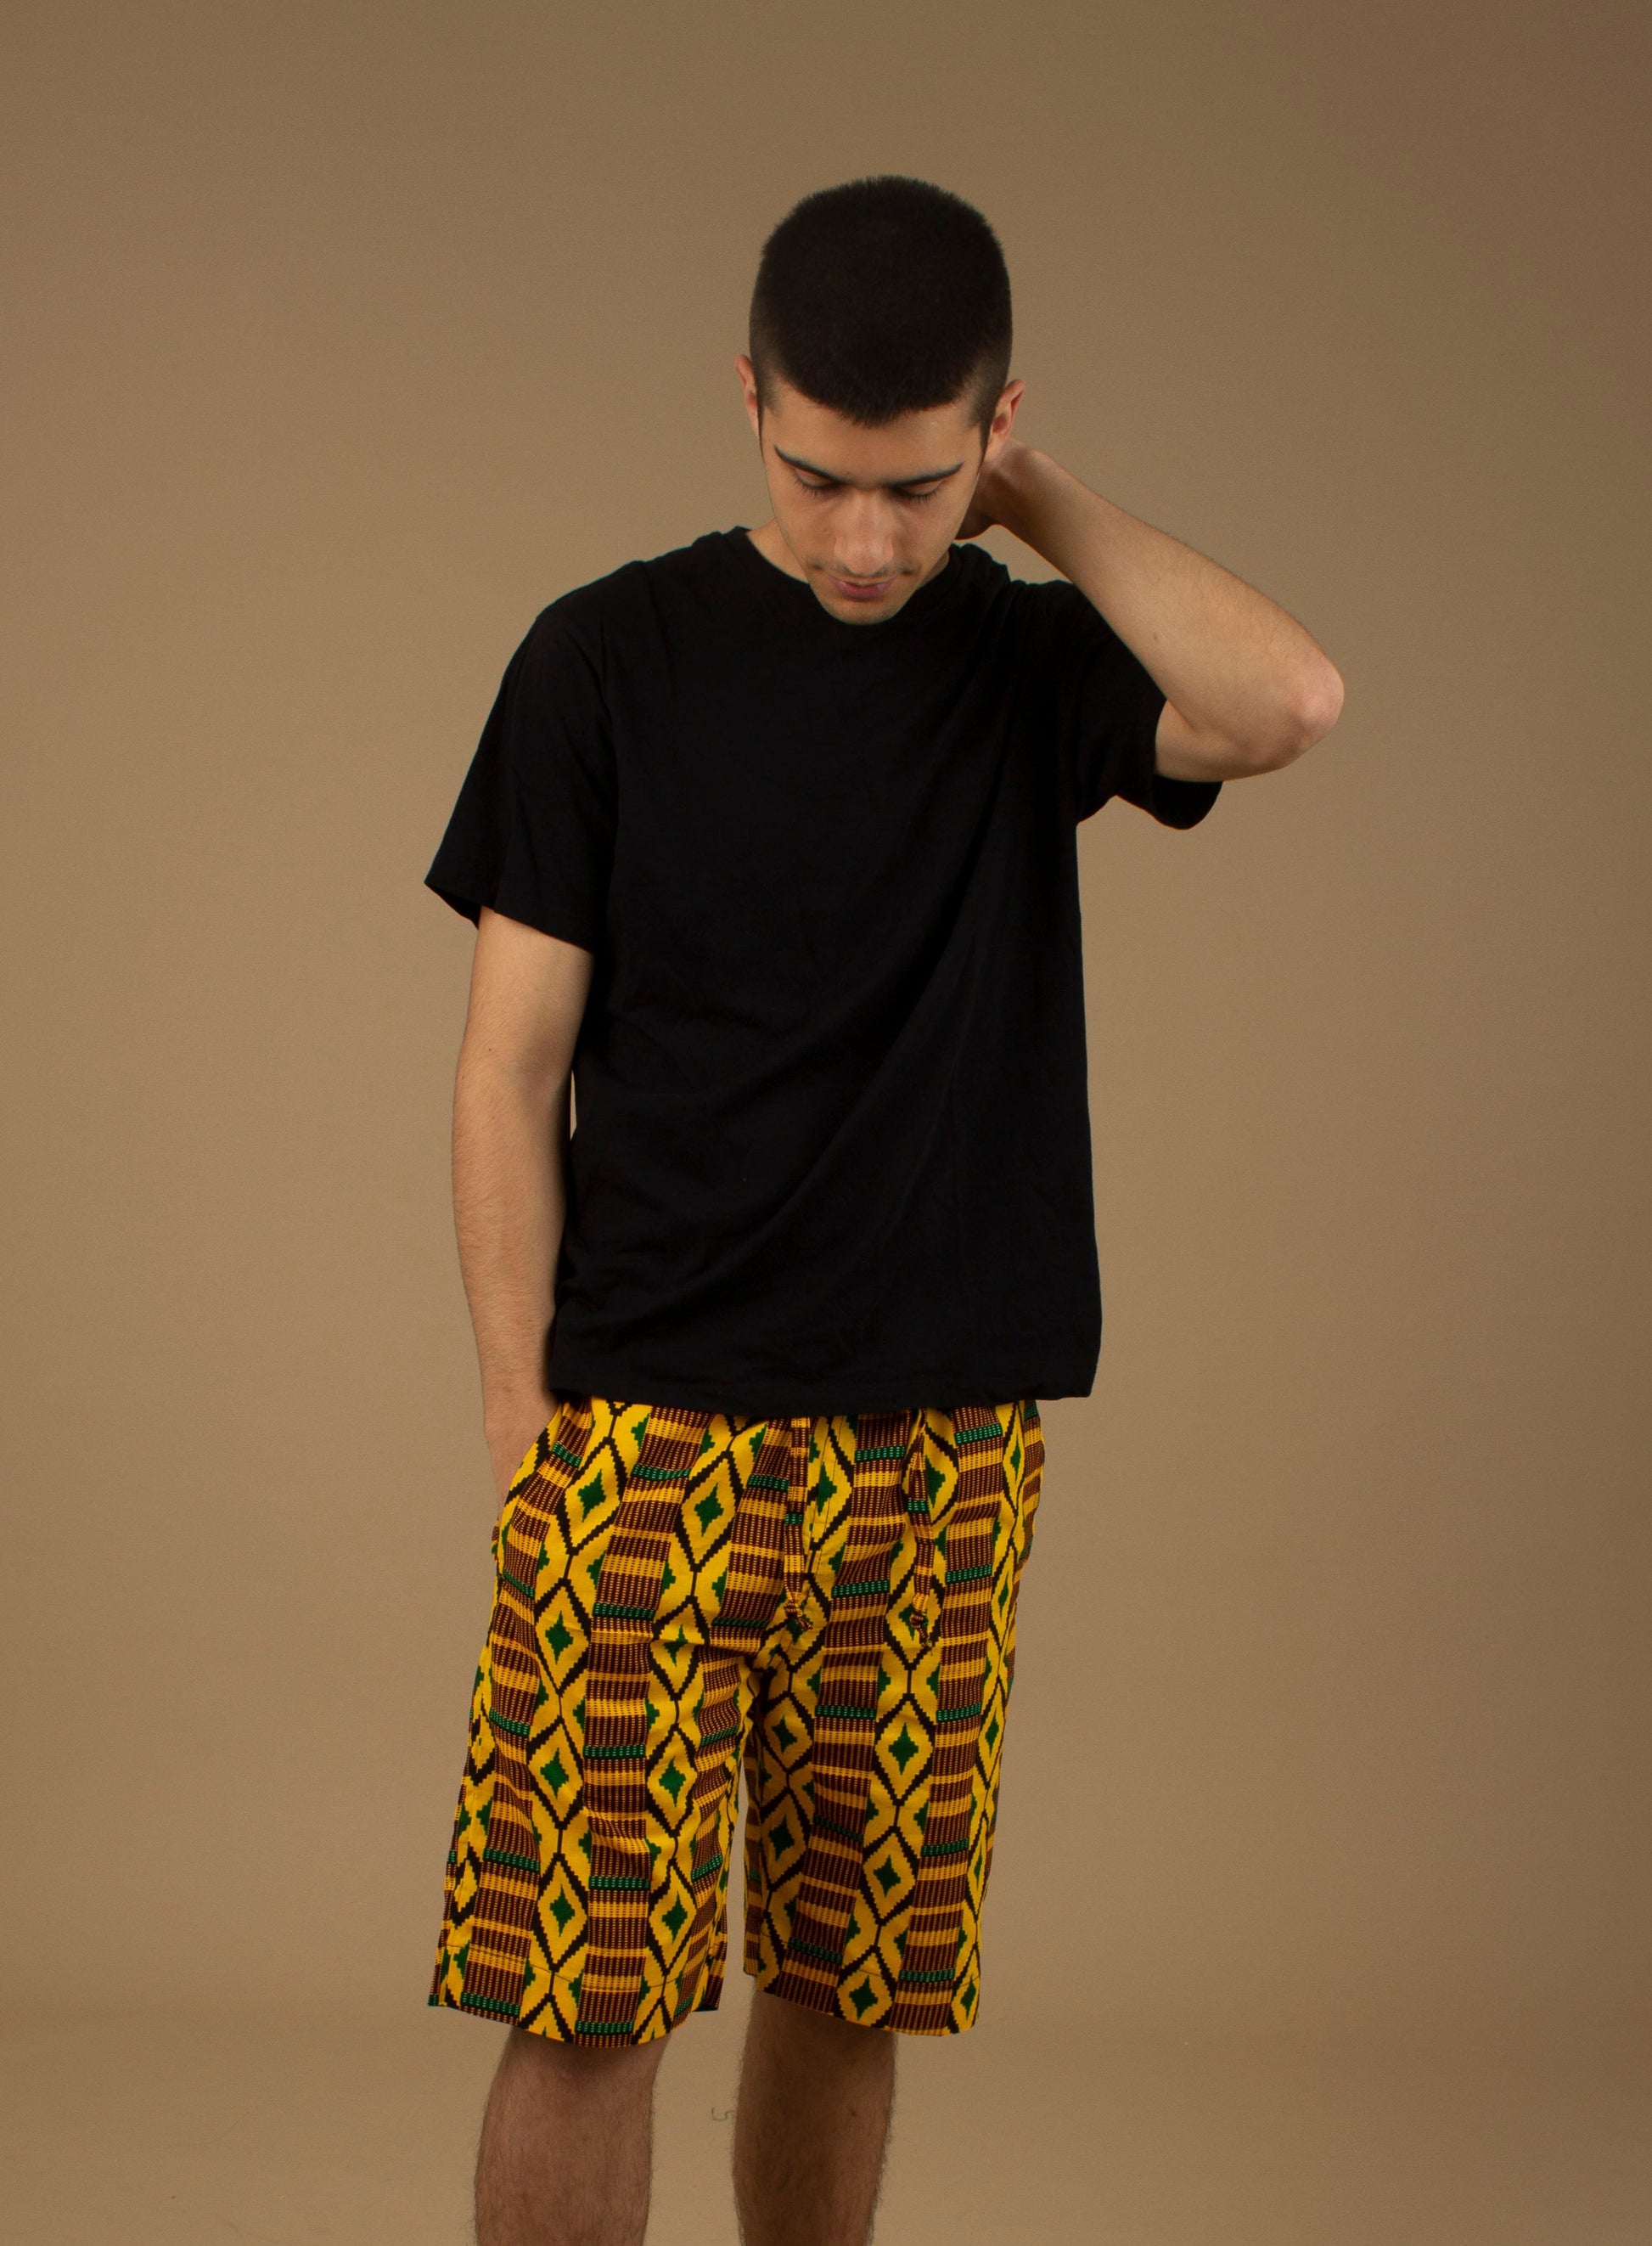 The Adina Kente African Print Shorts is a striking Diamond geometric kente pattern in green, yellow and black made from sustainably sourced 100% Cotton. Designed in England Made in Nigeria.